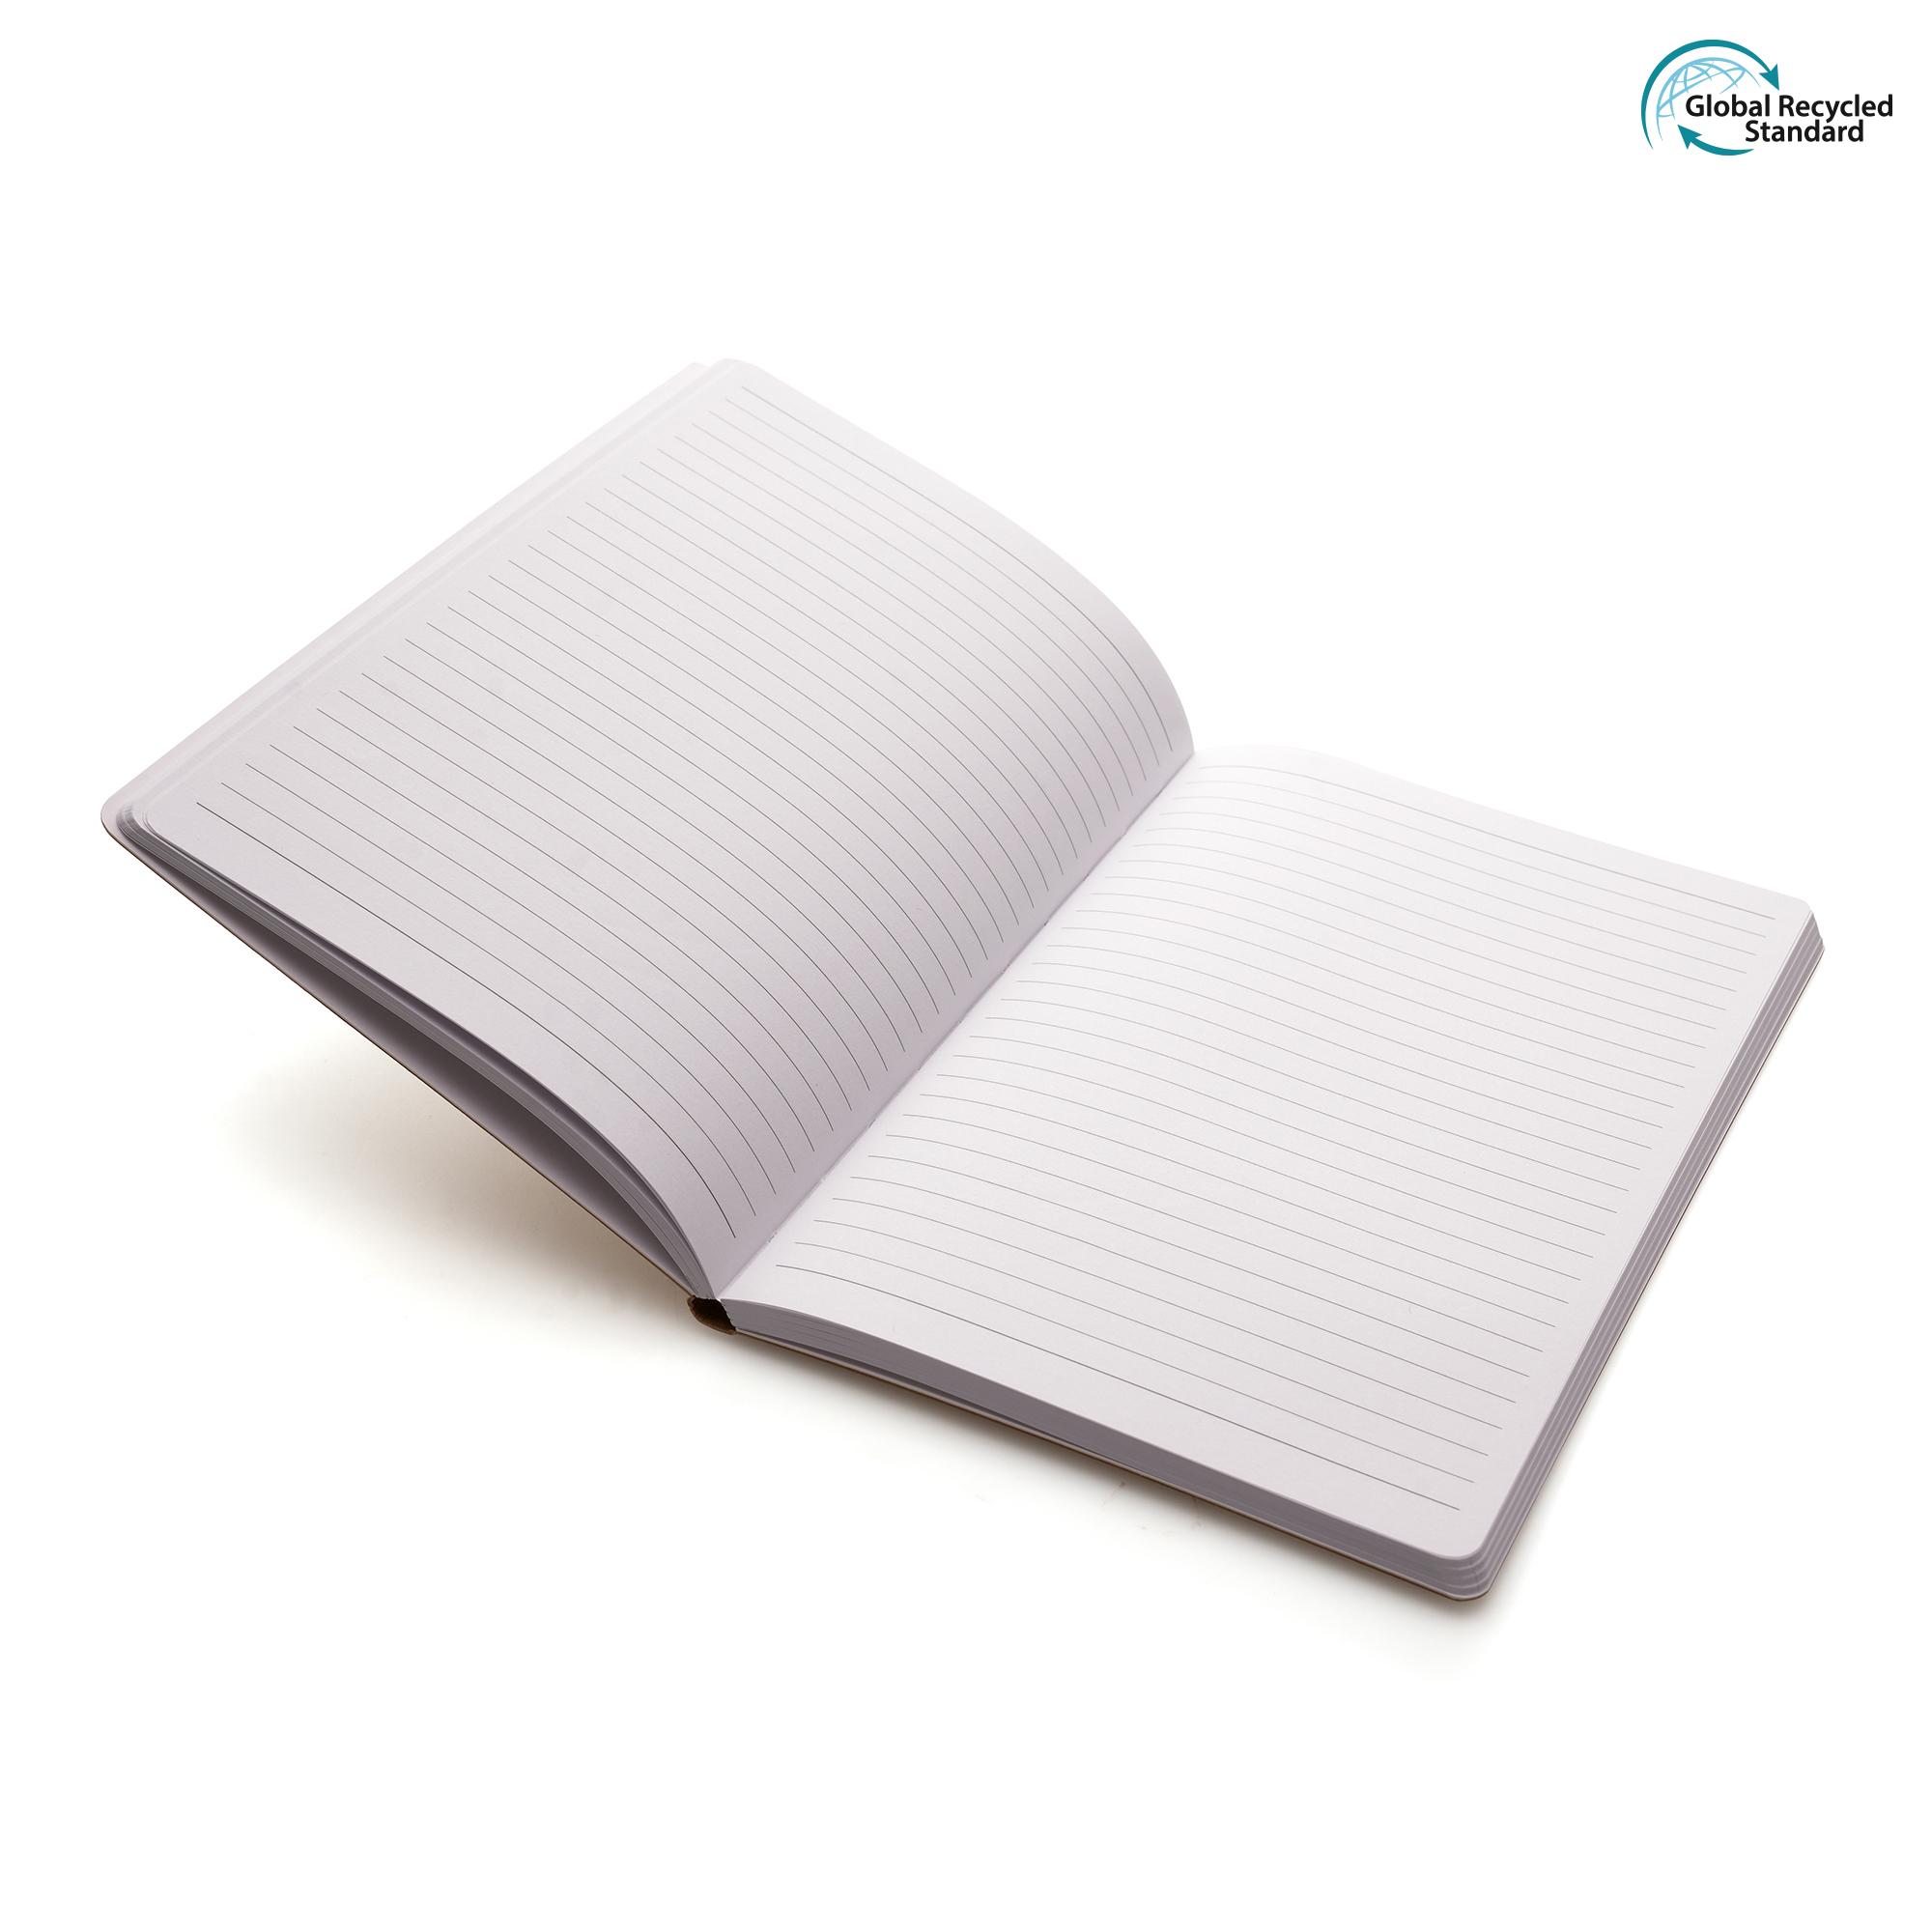 An eco-friendly notebook with Kraft paper and cardboard textured finished cover and 96 white lined recycled paper sheets. All materials are recycled or widely recyclable.